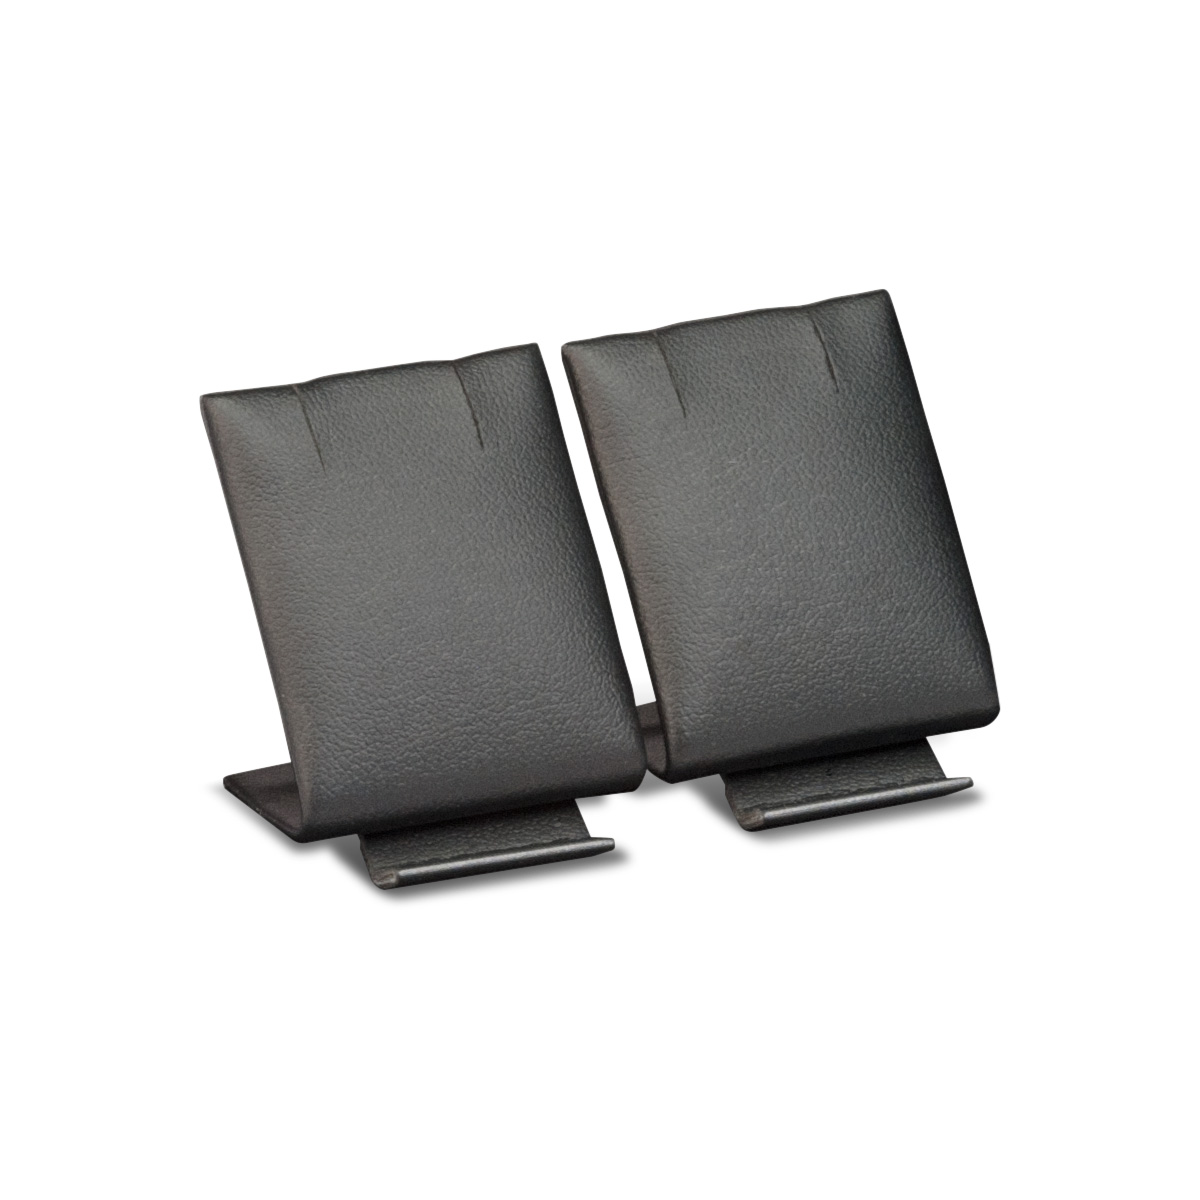 Double presentation display for earrings, medium, smooth leather imitation, black, LxWxD ca. 3,0 x 7,0 x 4,5 cm